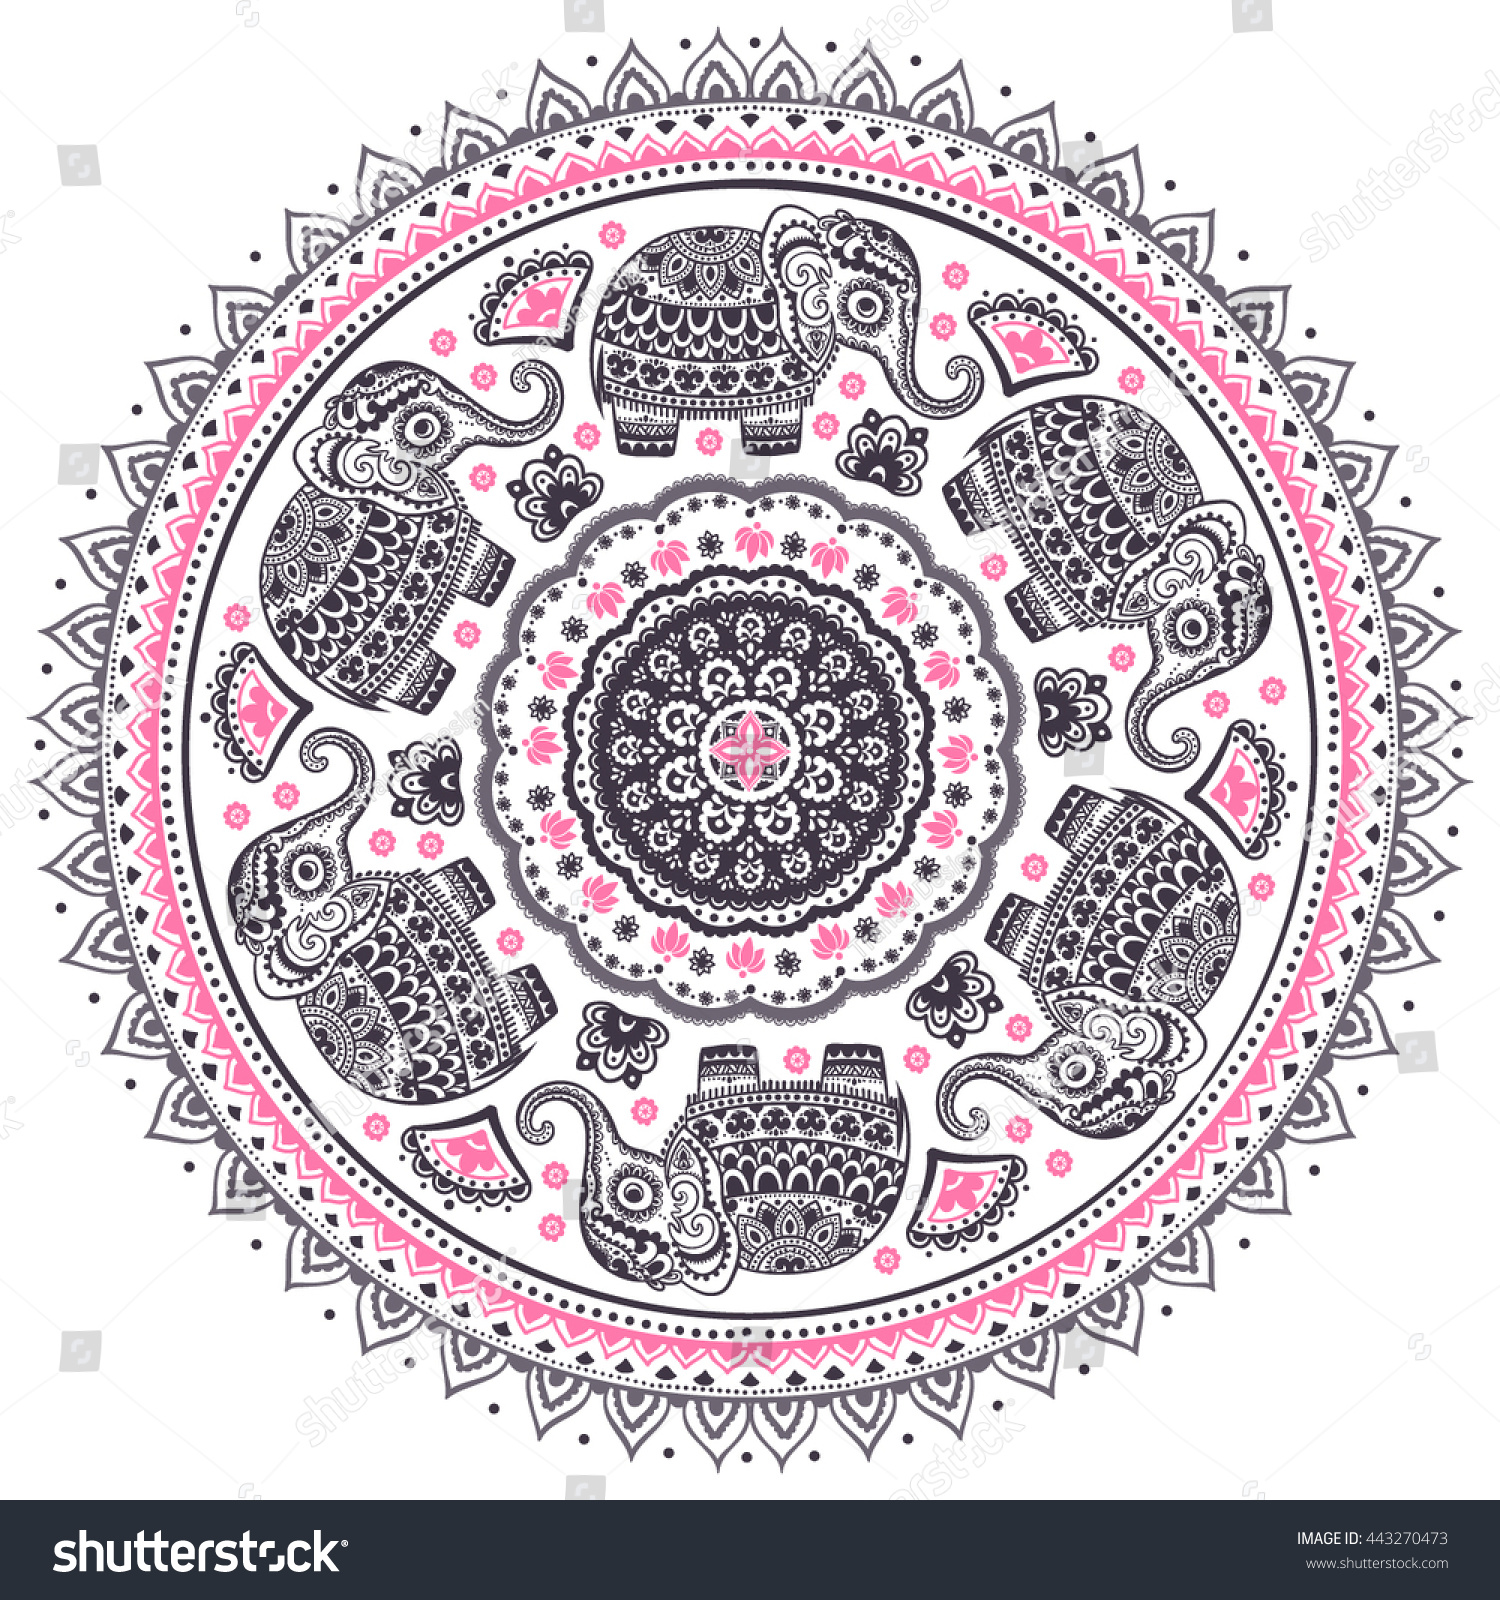 SVG of Vintage graphic vector Indian lotus cute ethnic elephant mandala pattern. African tribal ornament. Can be used for a coloring book, textile, prints, phone case, greeting card, business card svg